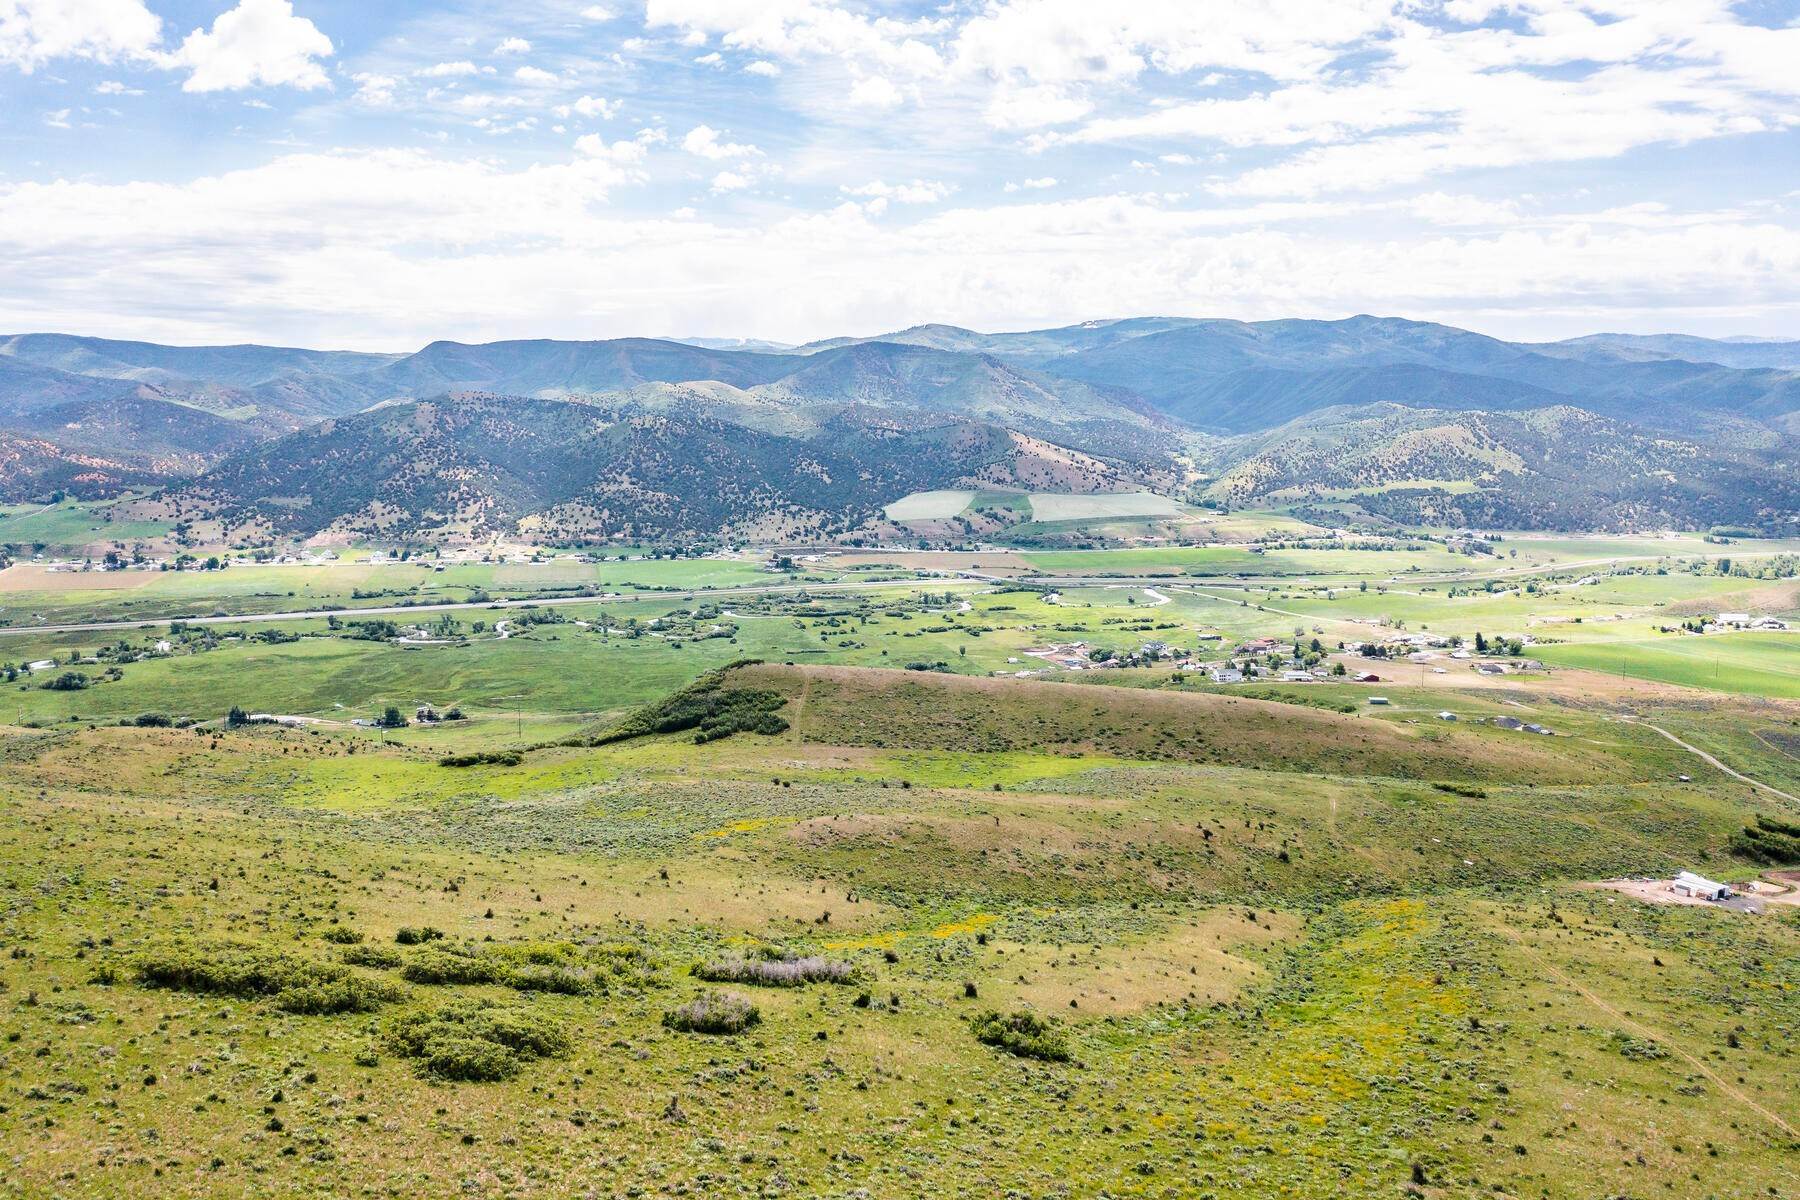 44. Farm and Ranch Properties for Sale at 261 Acres on the Weber River only 15 minutes from Park City 1255 S West Hoytsville Rd Hoytsville, Utah 84017 United States